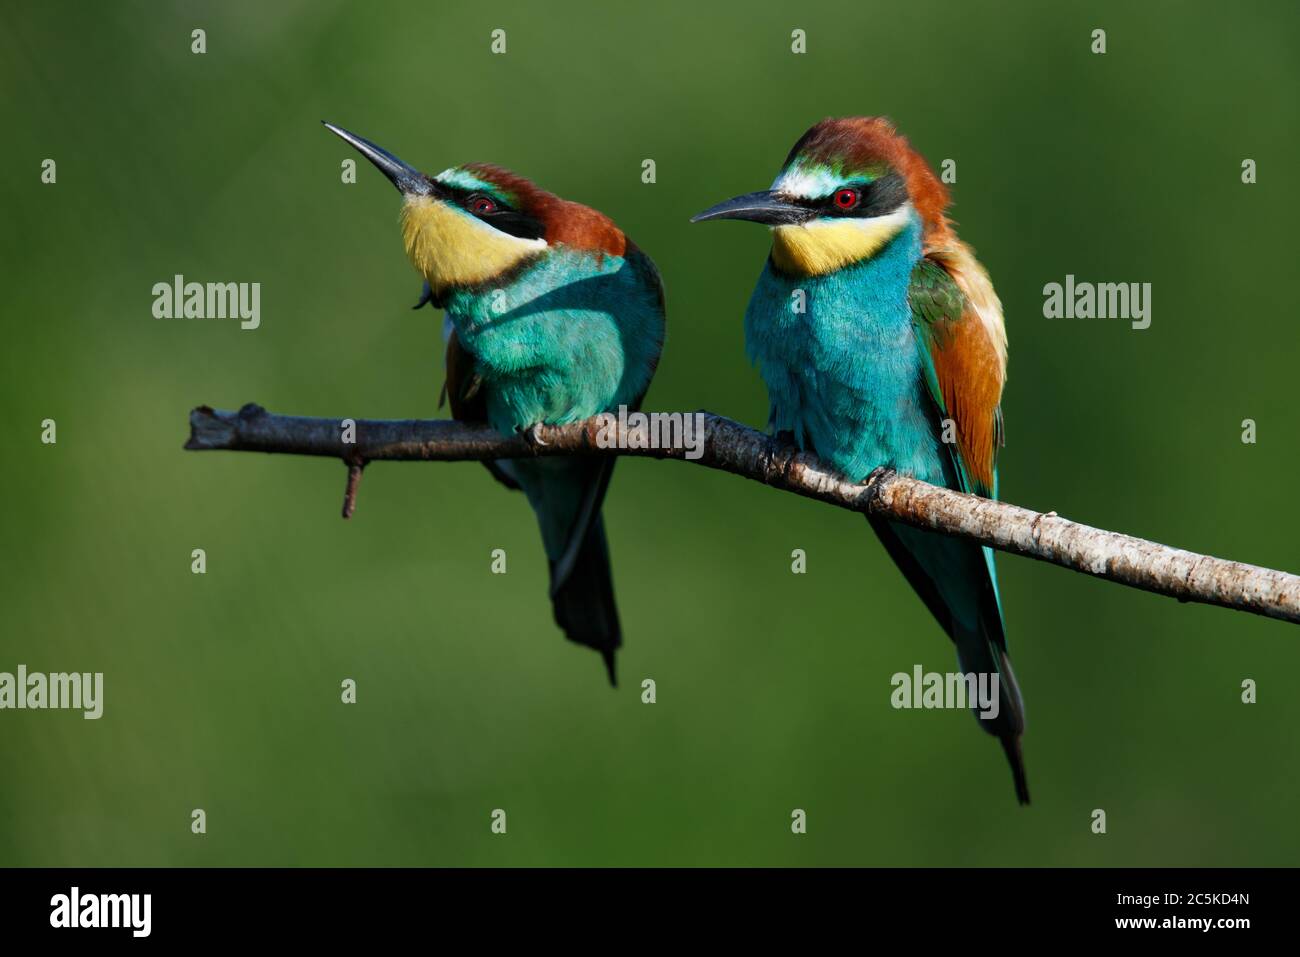 A Golden bee eater sits on a branch on a green background Stock Photo